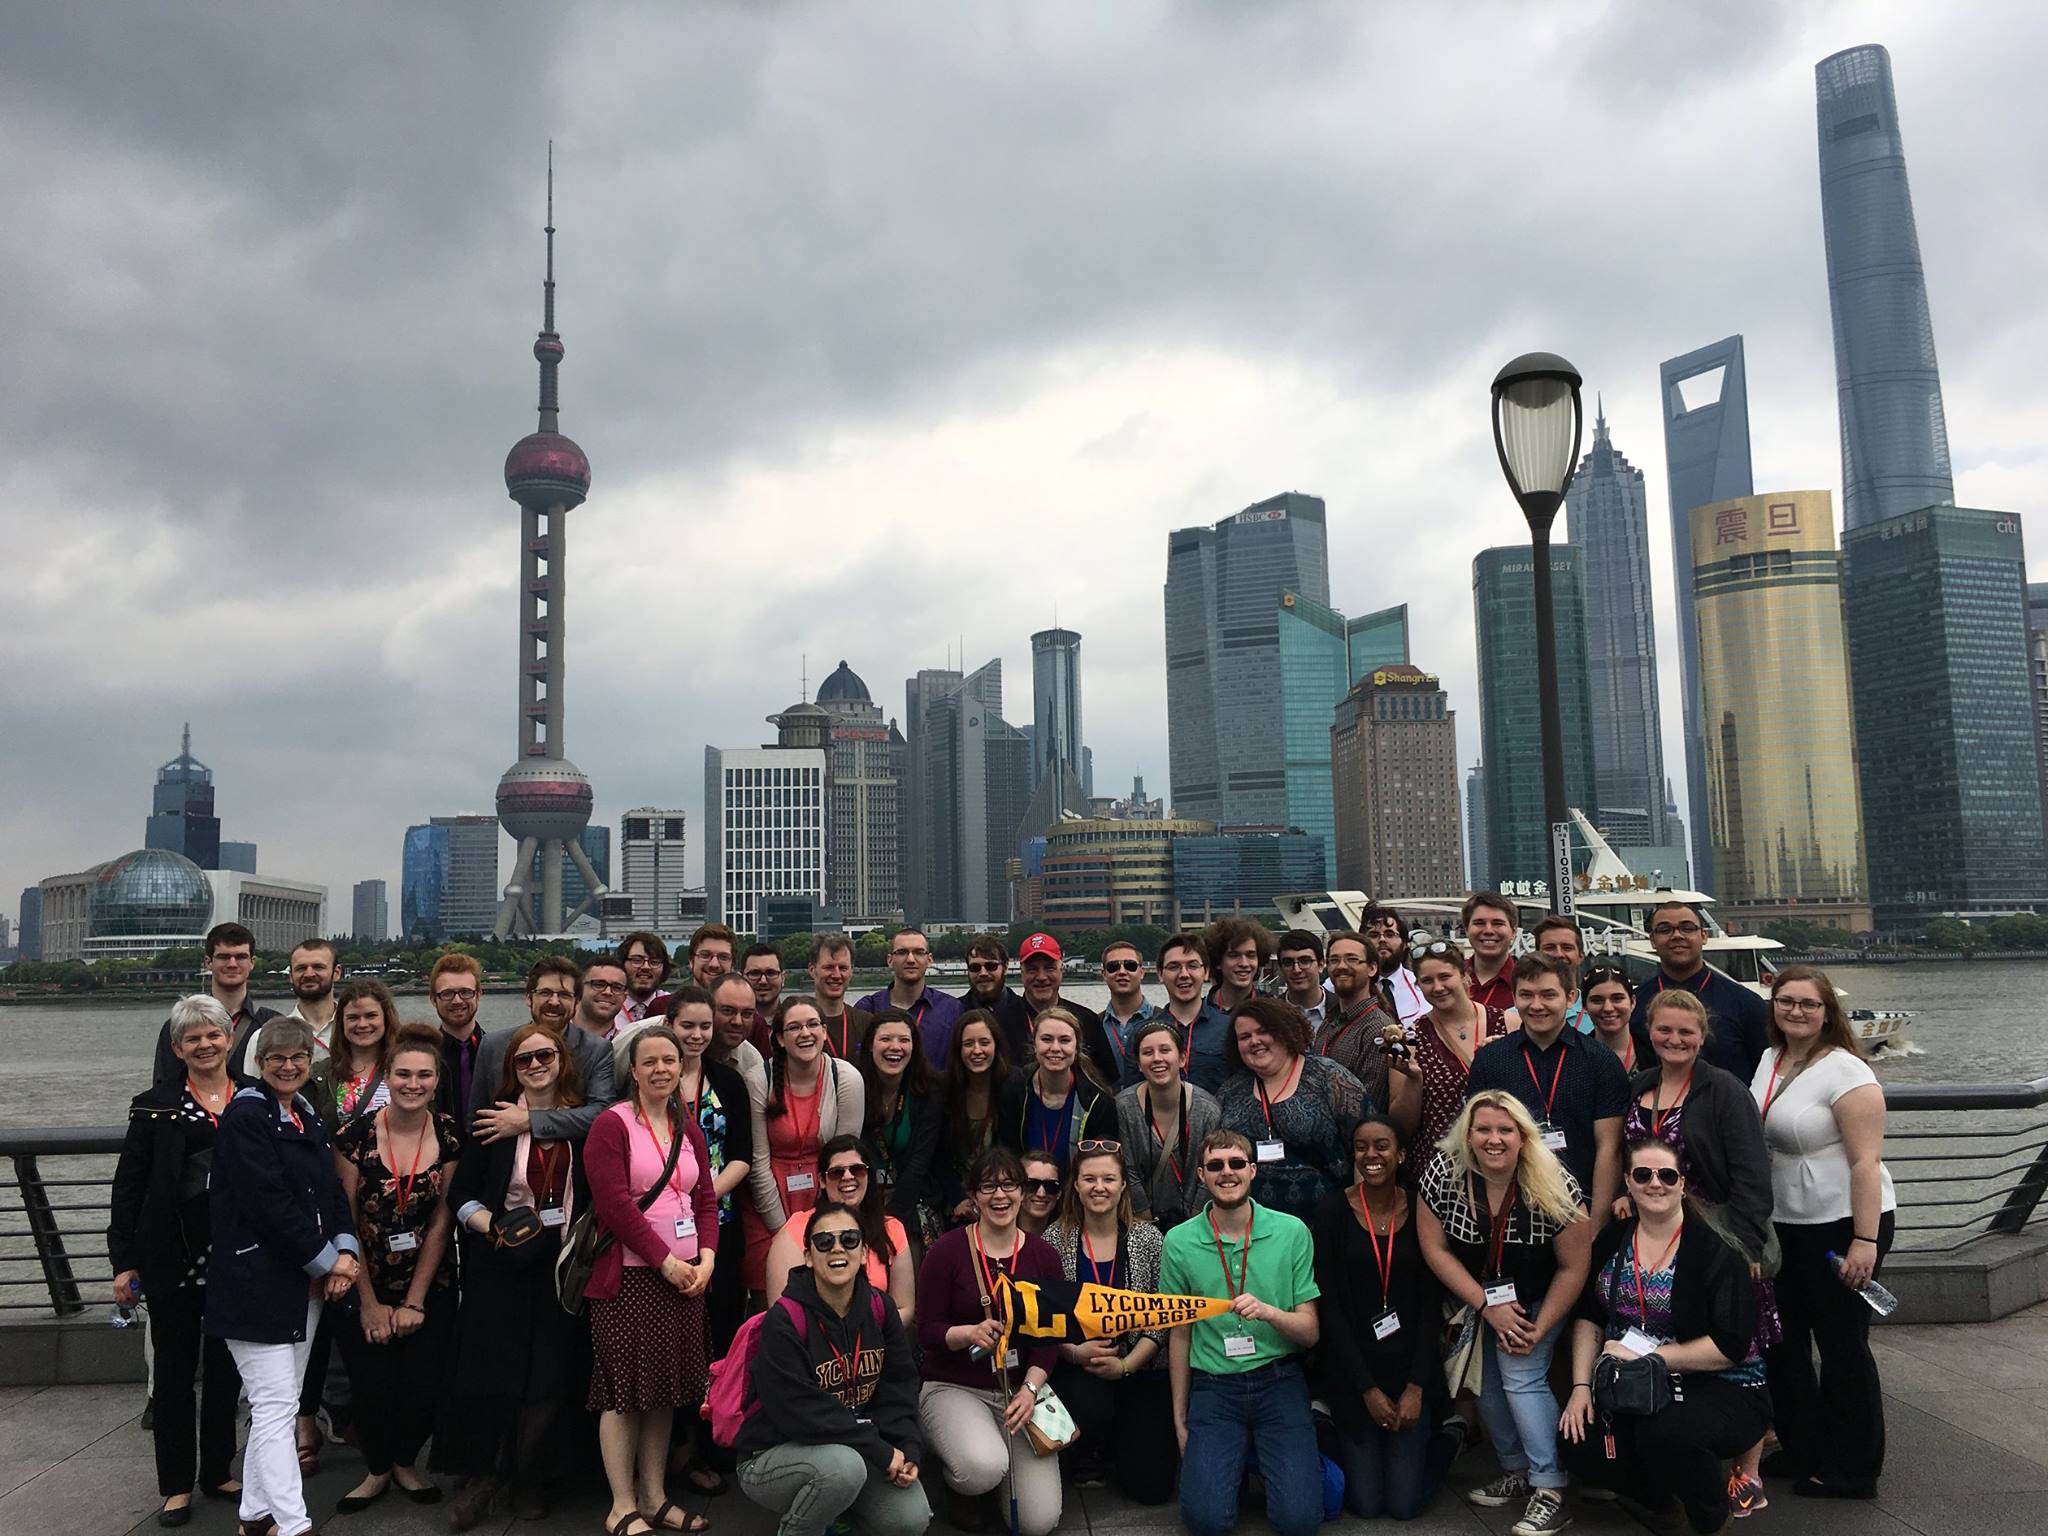 Posing for a group photo in Shanghai. Behind them are the Huangpu River and the Pudong financial district.